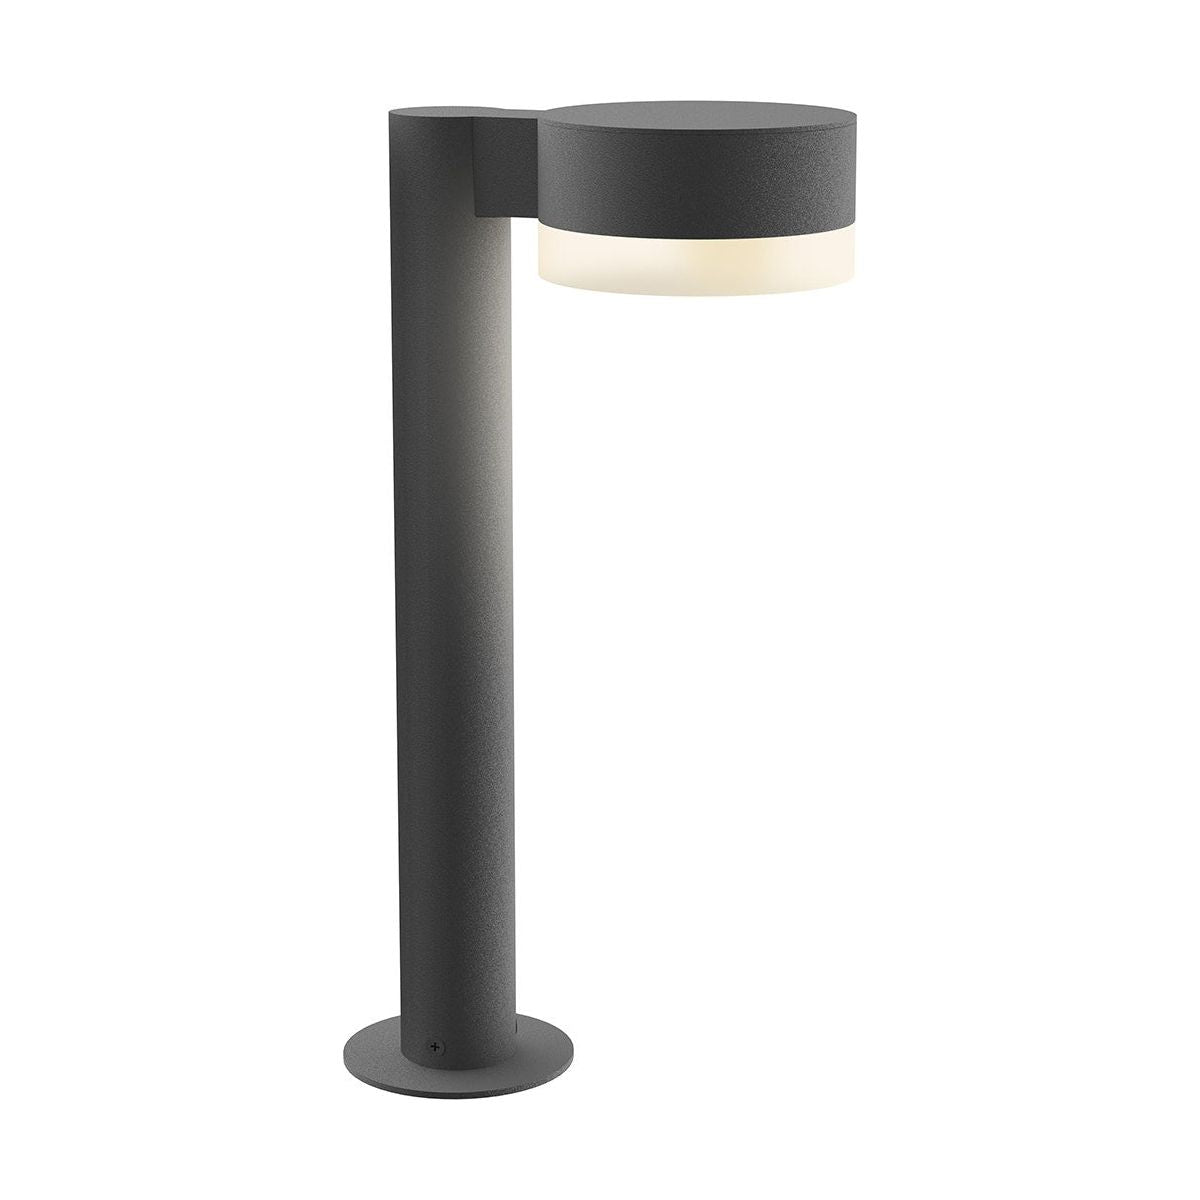 REALS 16" LED Bollard with Plate Cap and Cylinder Lens